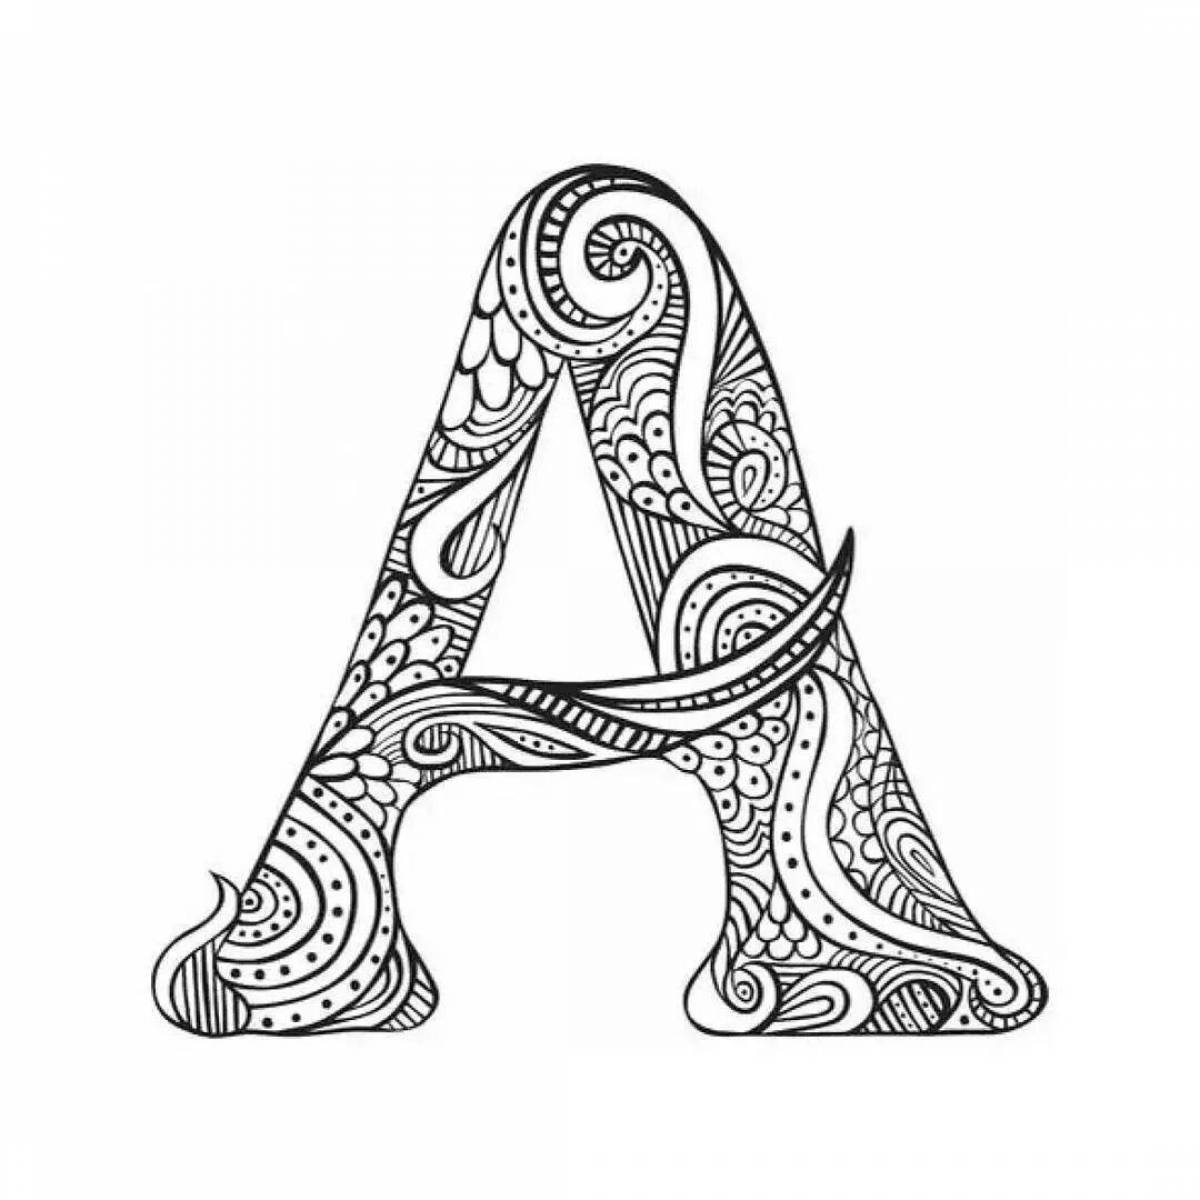 Coloring book peaceful anti-stress letters